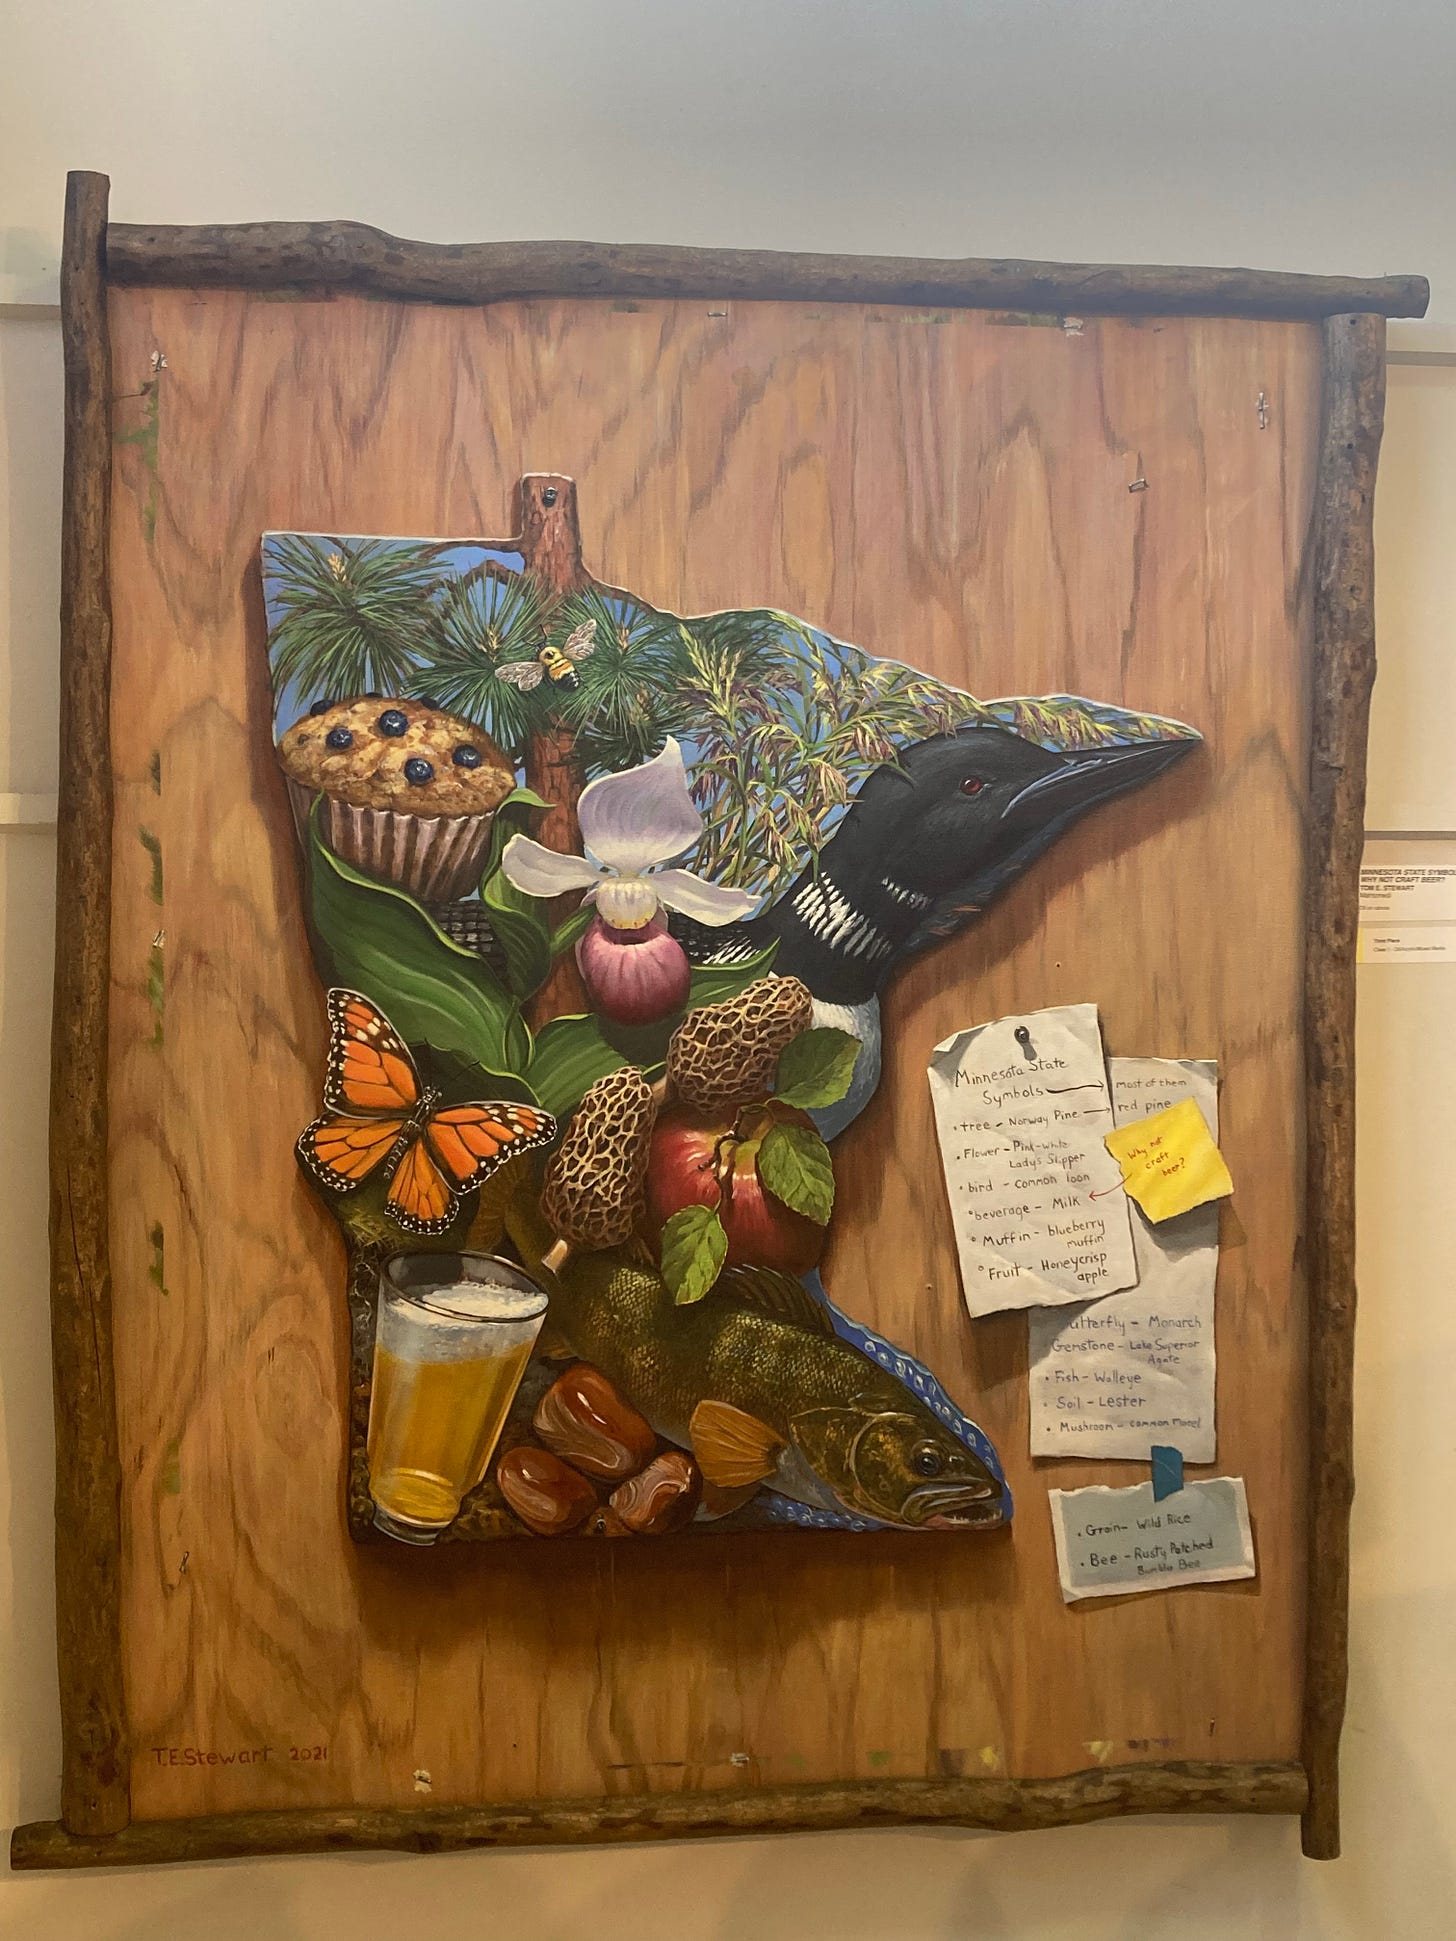 a shape of Minnesota on a wooden background is filled with realistic interpretations of the state's symbols: on the top left, a blueberry muffin, a bumblebee, a pine tree. in the center, a monarch butterfly, a lady slipper flower, mushroom morels. on the top right, wild rice and a loon. in the middle right, an apple. on the bottom right, a walleye. on the bottom left, a glass of beer and some stones.